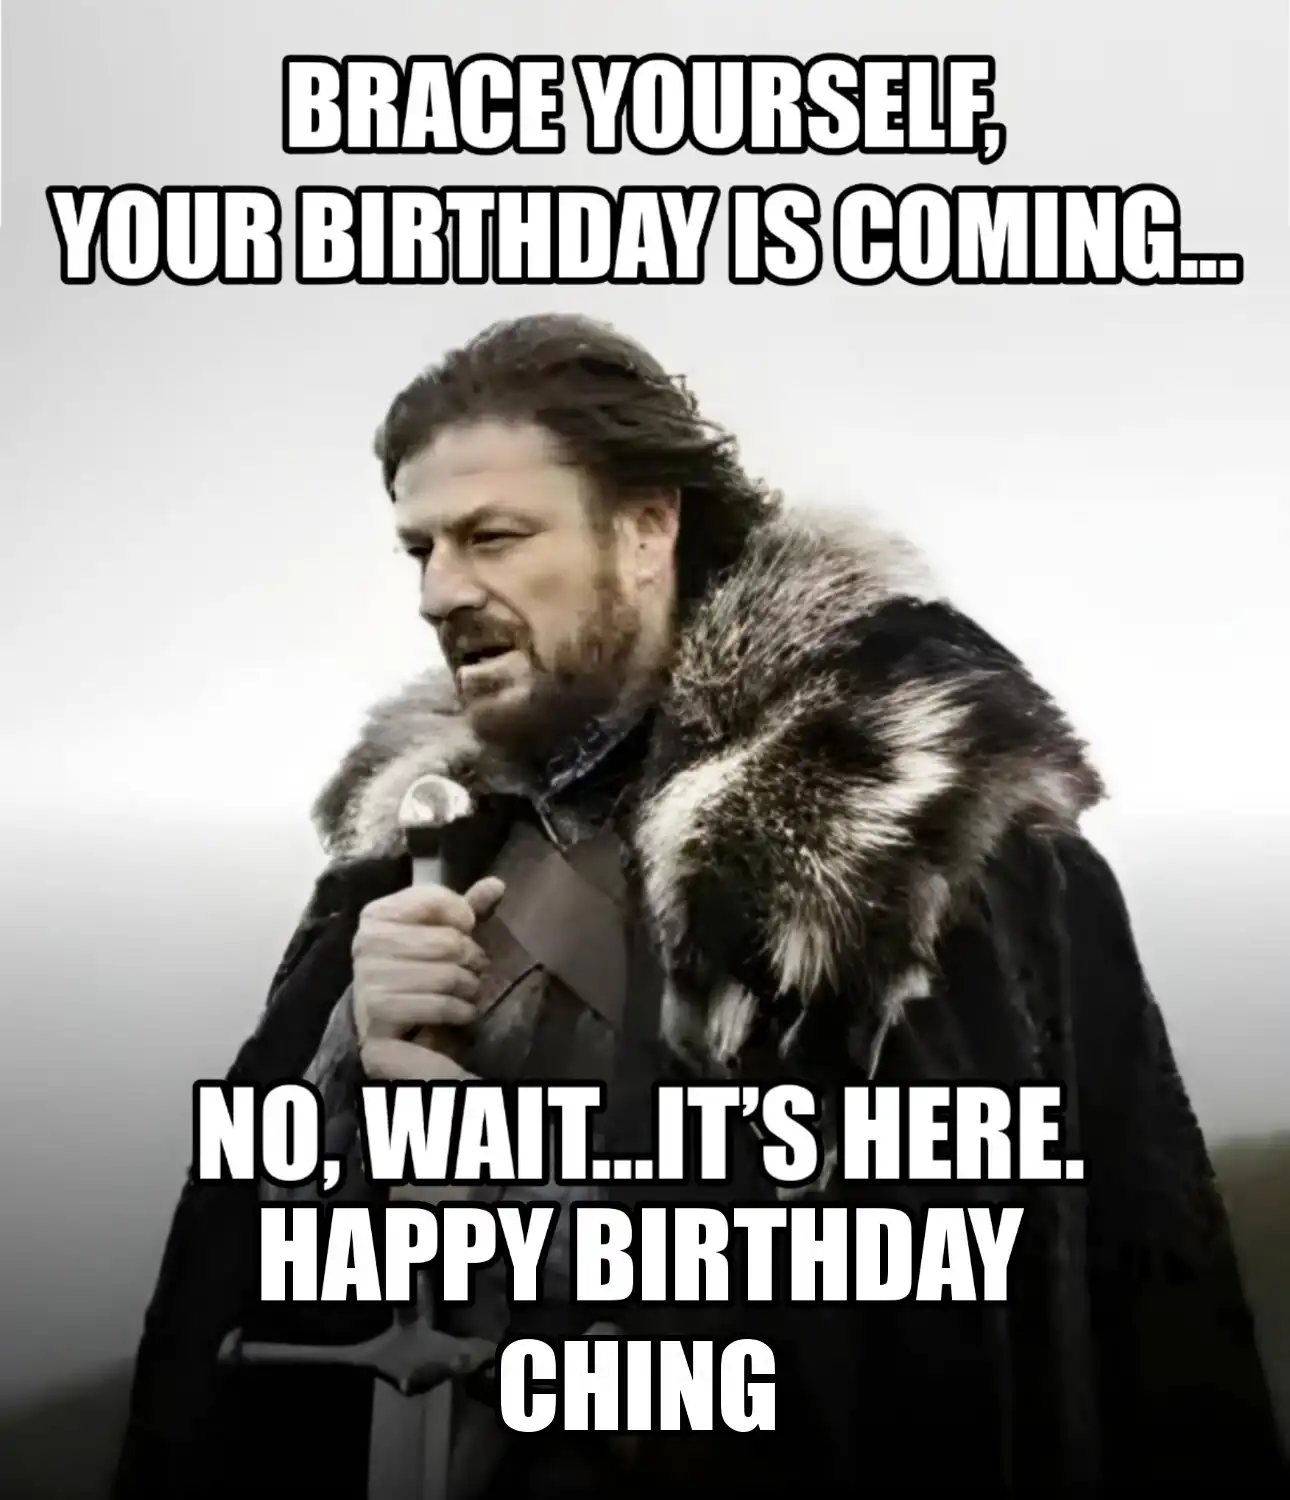 Happy Birthday Ching Brace Yourself Your Birthday Is Coming Meme